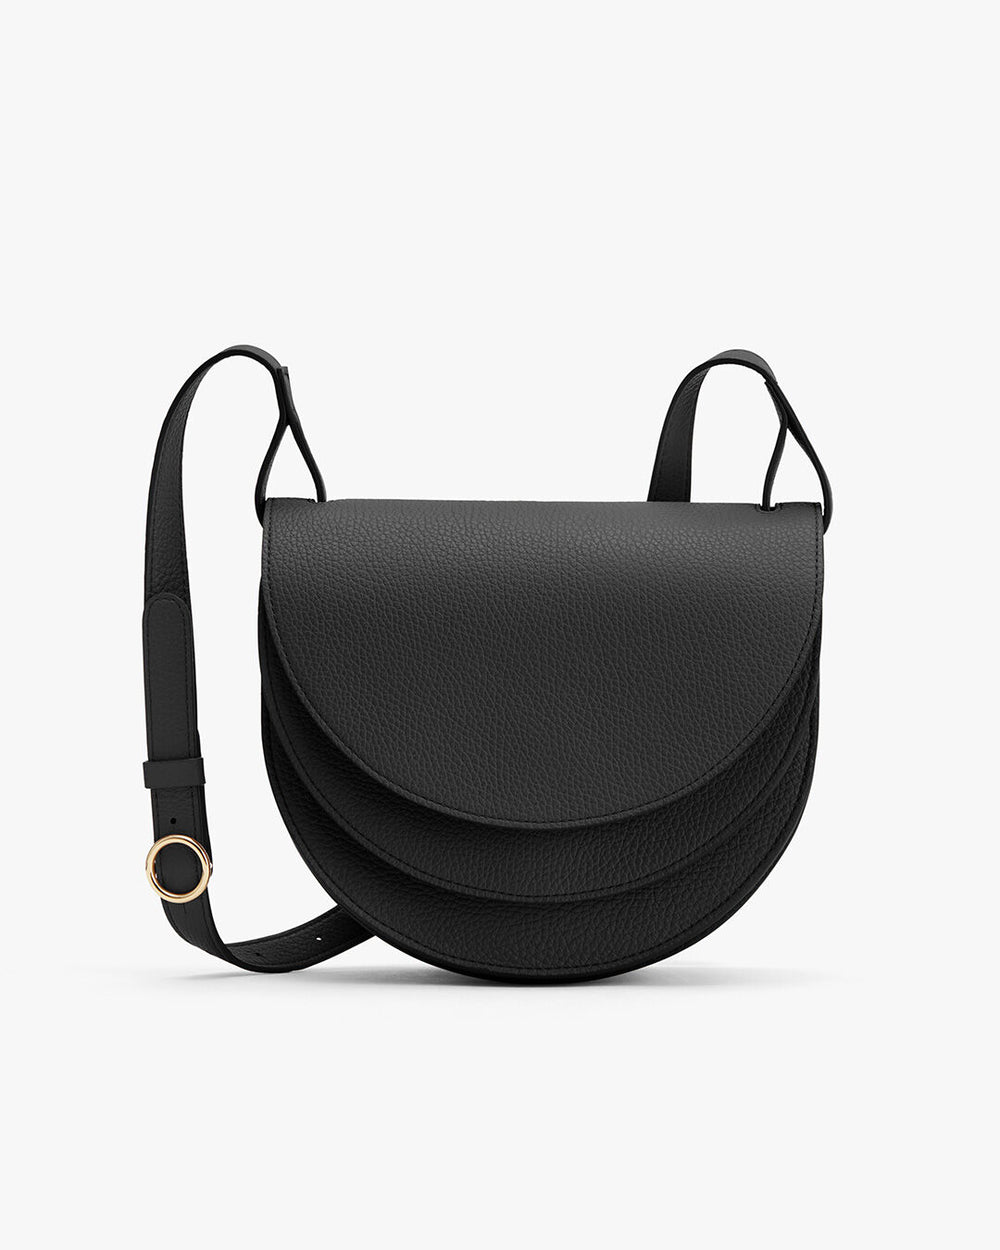 Small saddle-style shoulder bag with a flap closure and an adjustable strap.